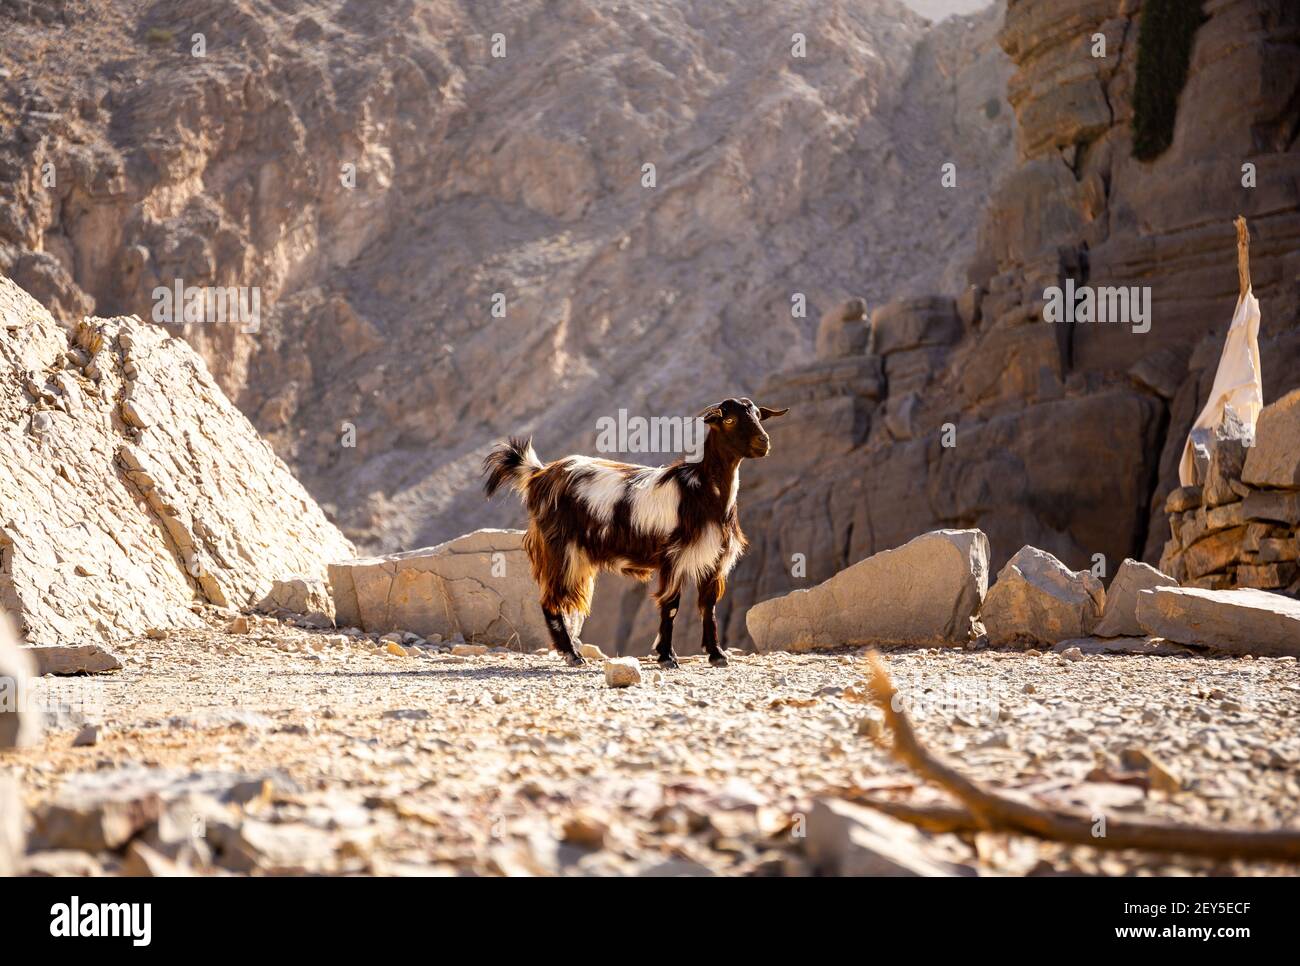 Black and white hairy female goat (doe, nanny) standing on the rocks in Jebel Jais mountain range with steep cliff in the background, Hajar Mountains. Stock Photo